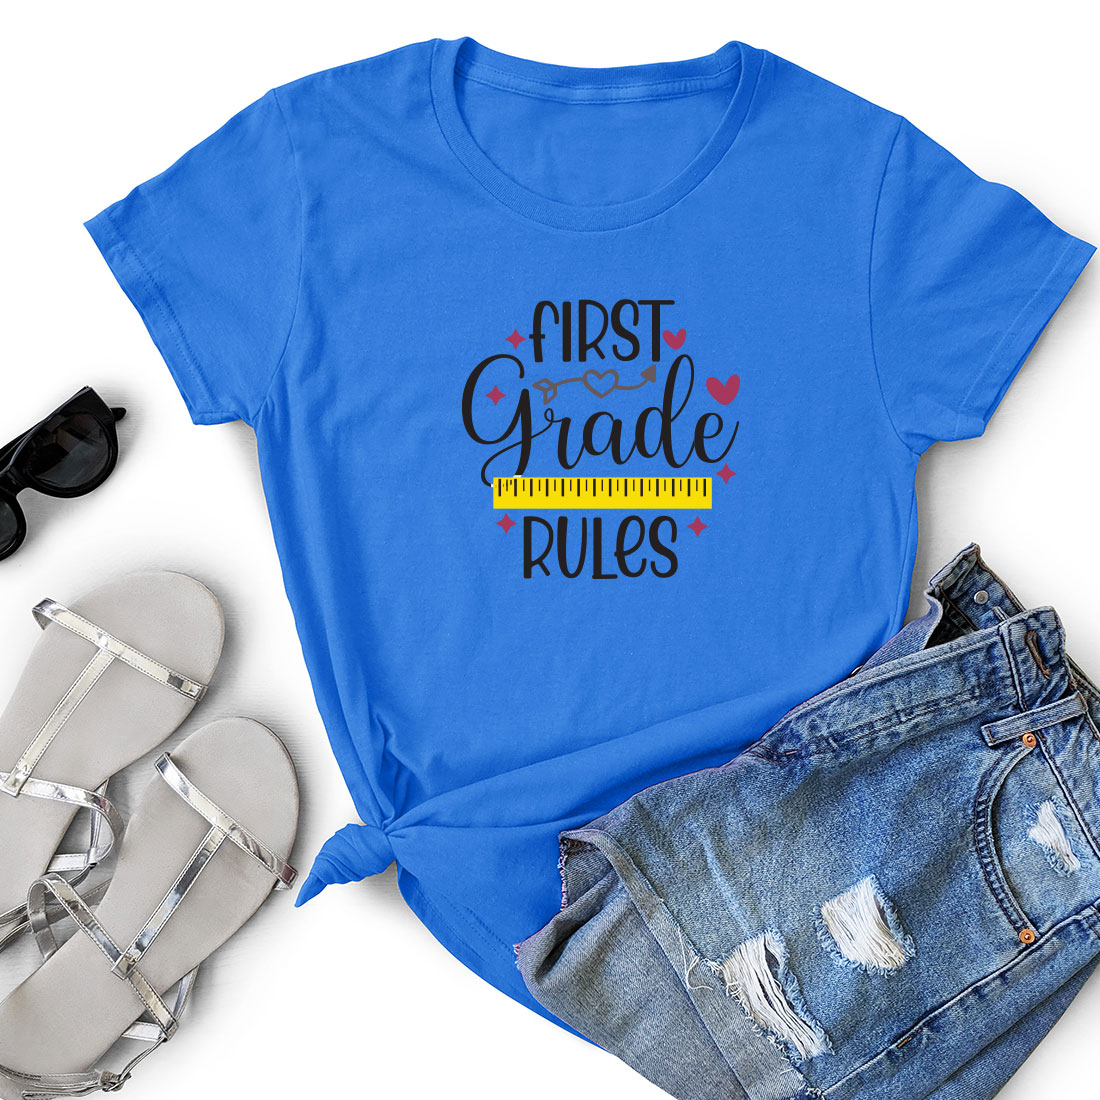 T - shirt that says first grade rules next to a pair of shorts.